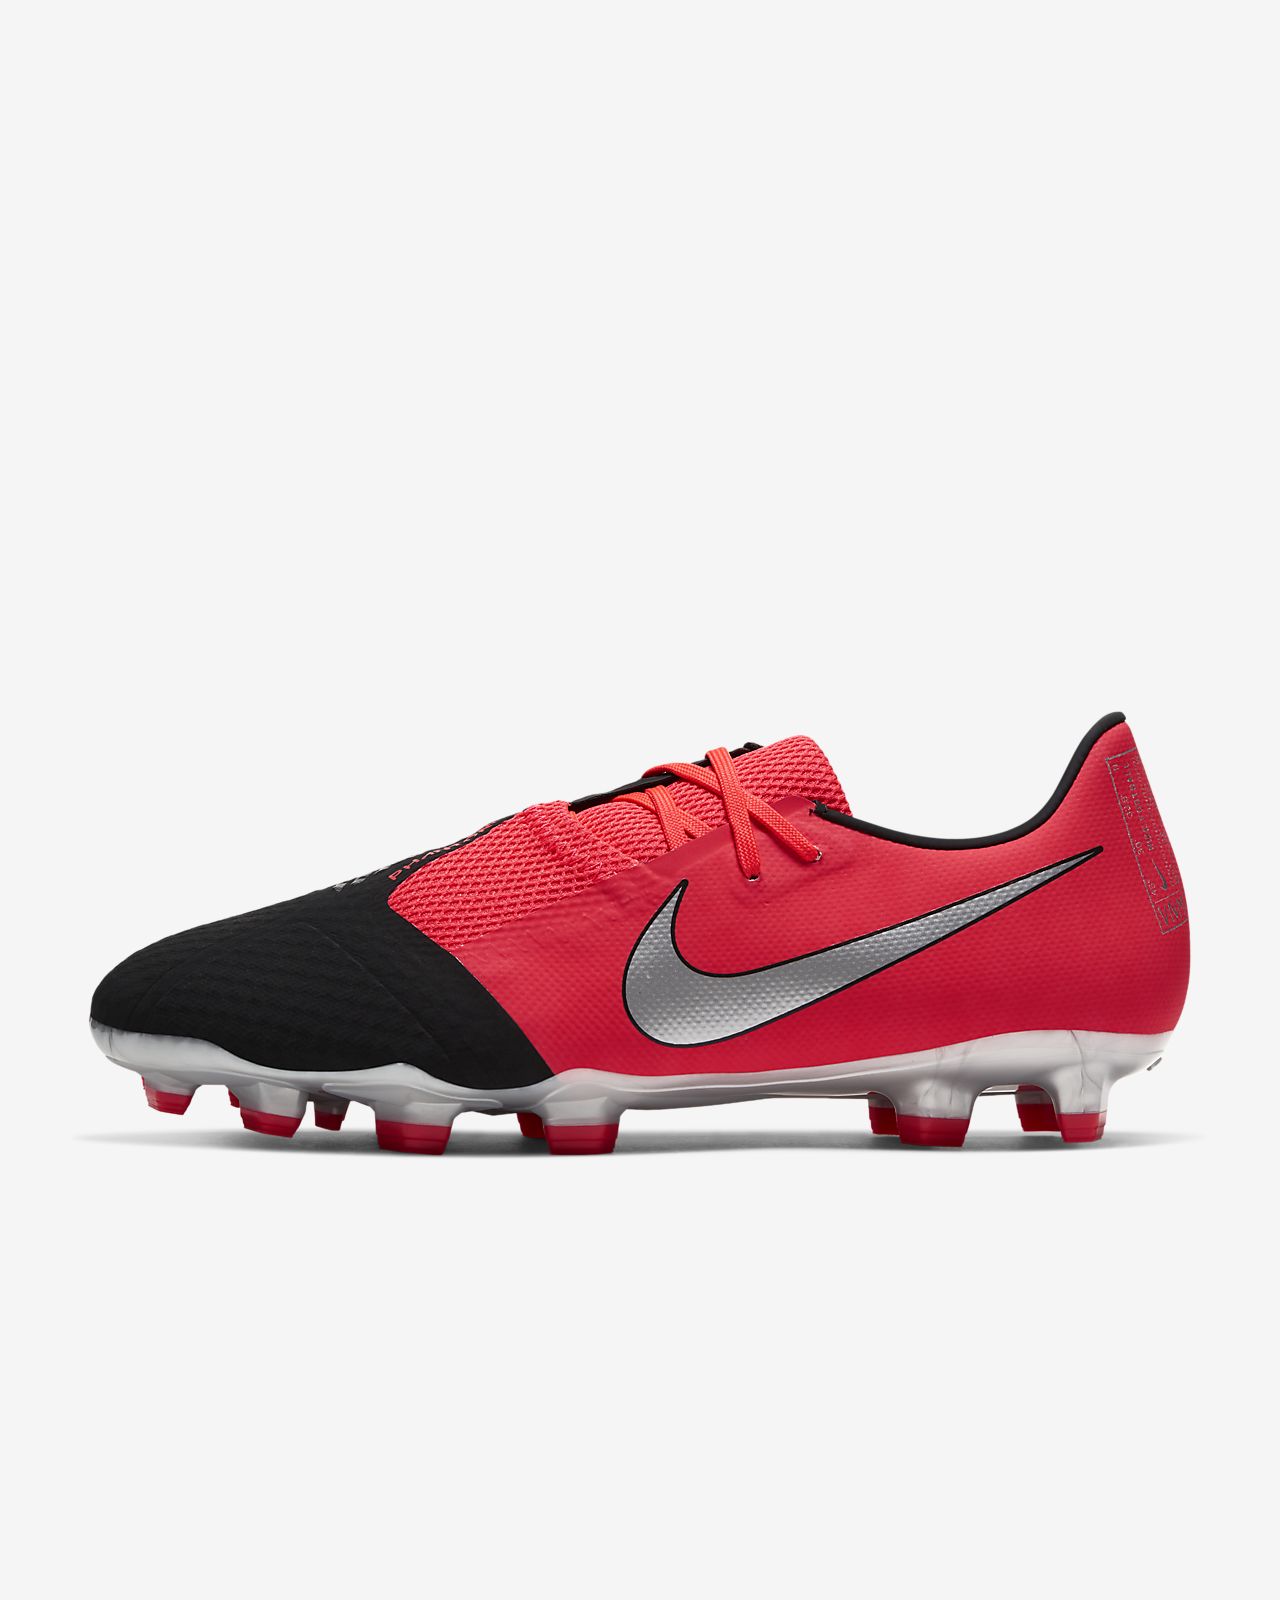 FG Firm-Ground Soccer Cleat. Nike.com